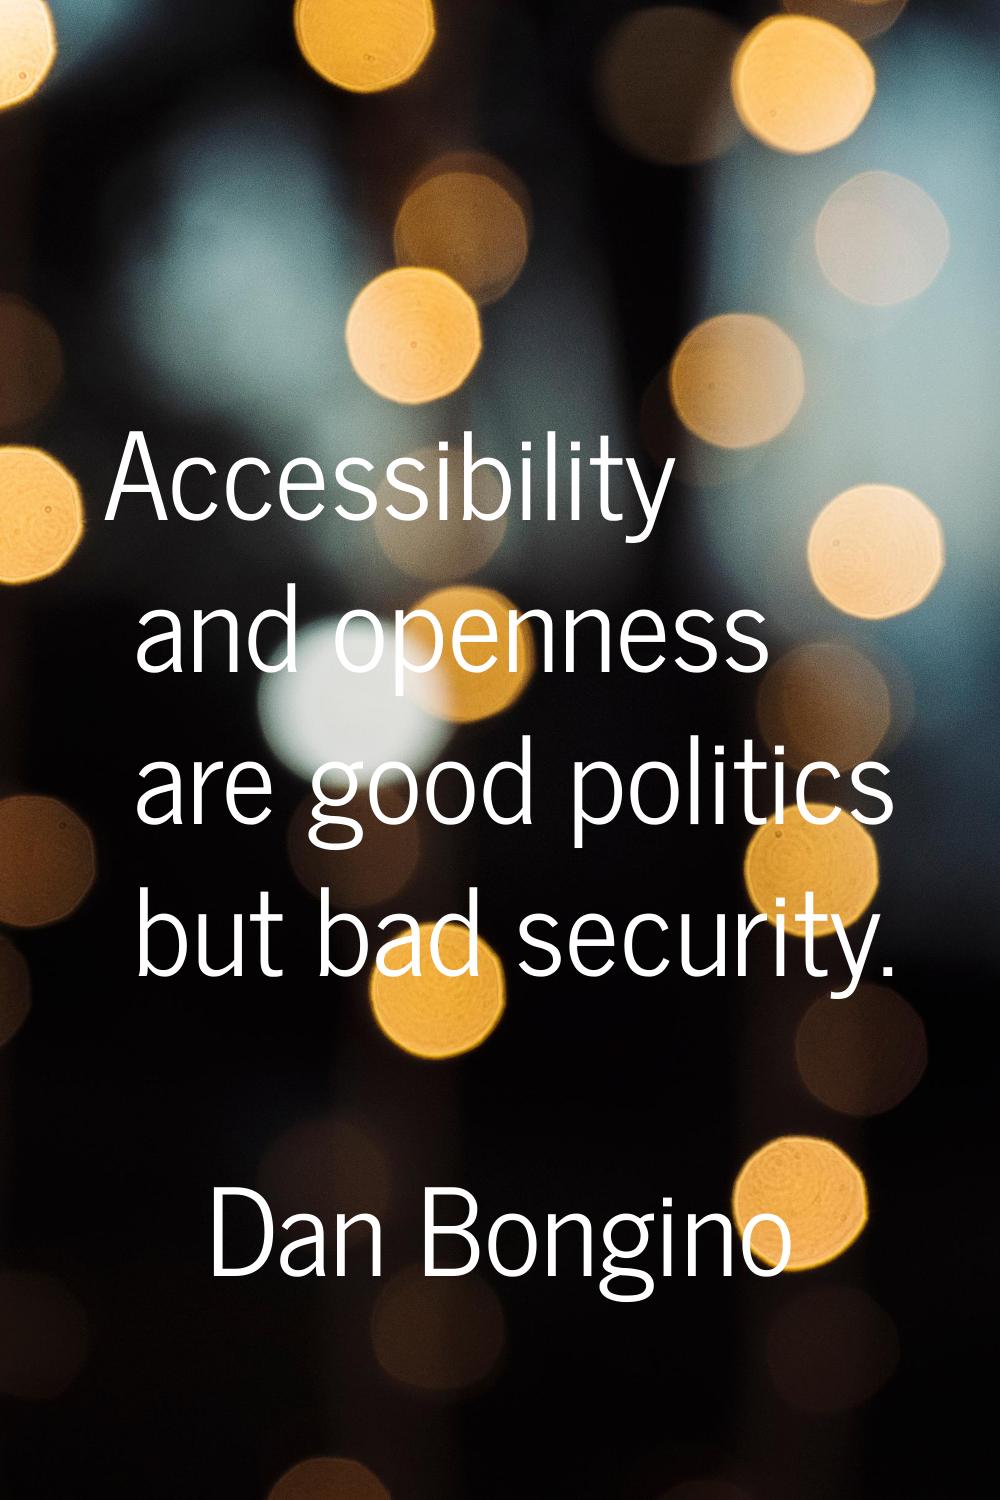 Accessibility and openness are good politics but bad security.